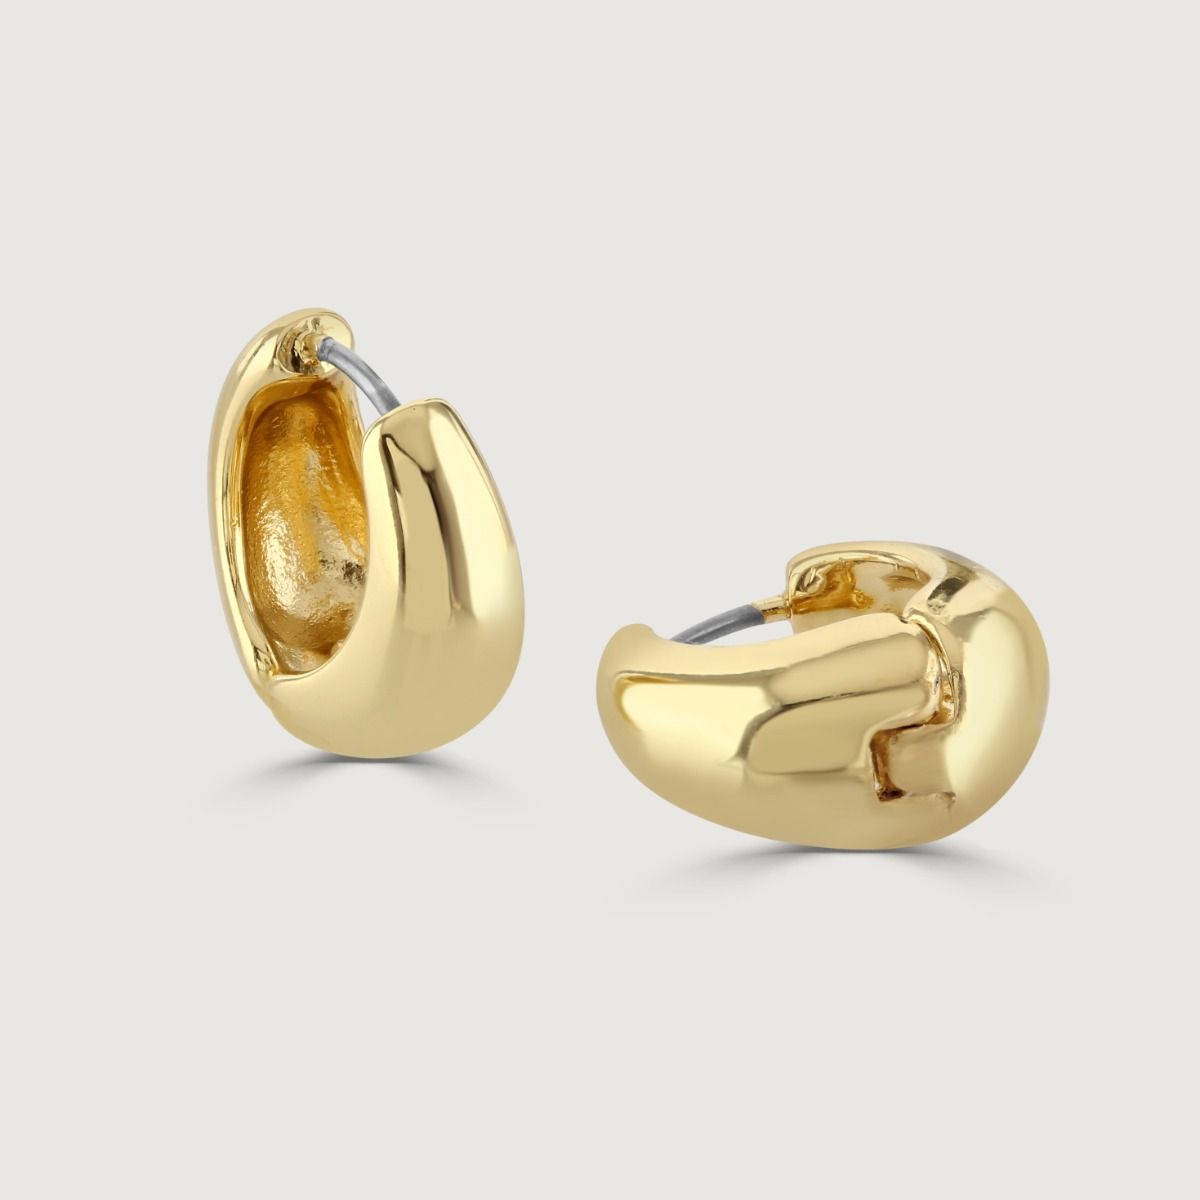 The Gold-Plated Huggie effectively combines elegance with a touch of modernity through the weighted centre. These huggies add a subtle element of sophistication, making them a perfect choice for adding a stylish edge to any ensemble.